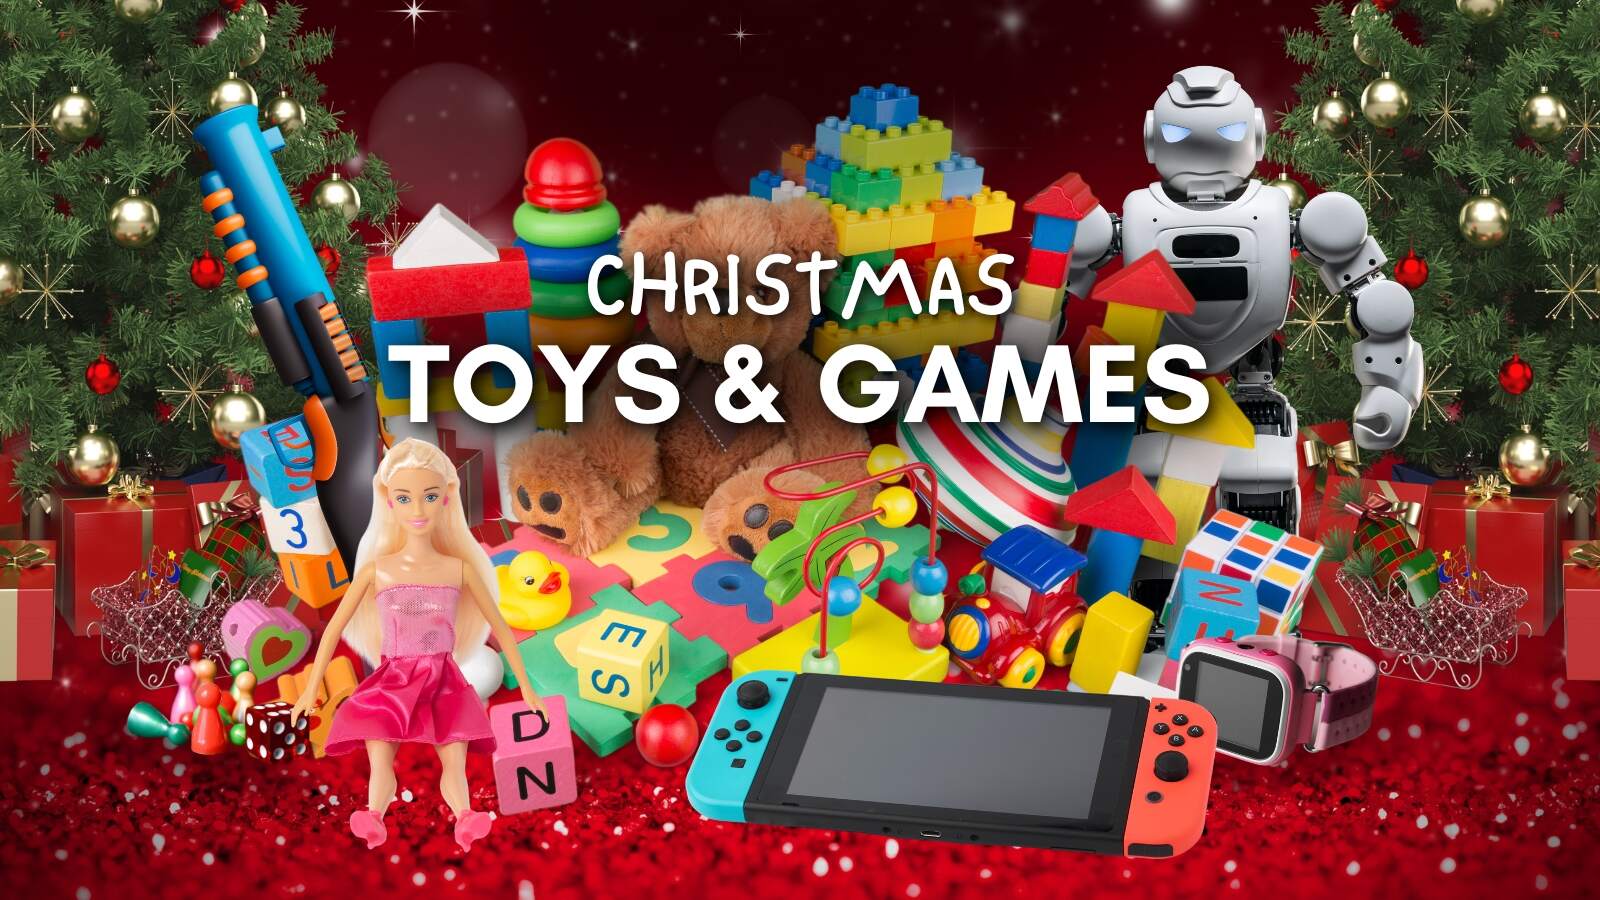 The Best 10 Toys and Games for Christmas